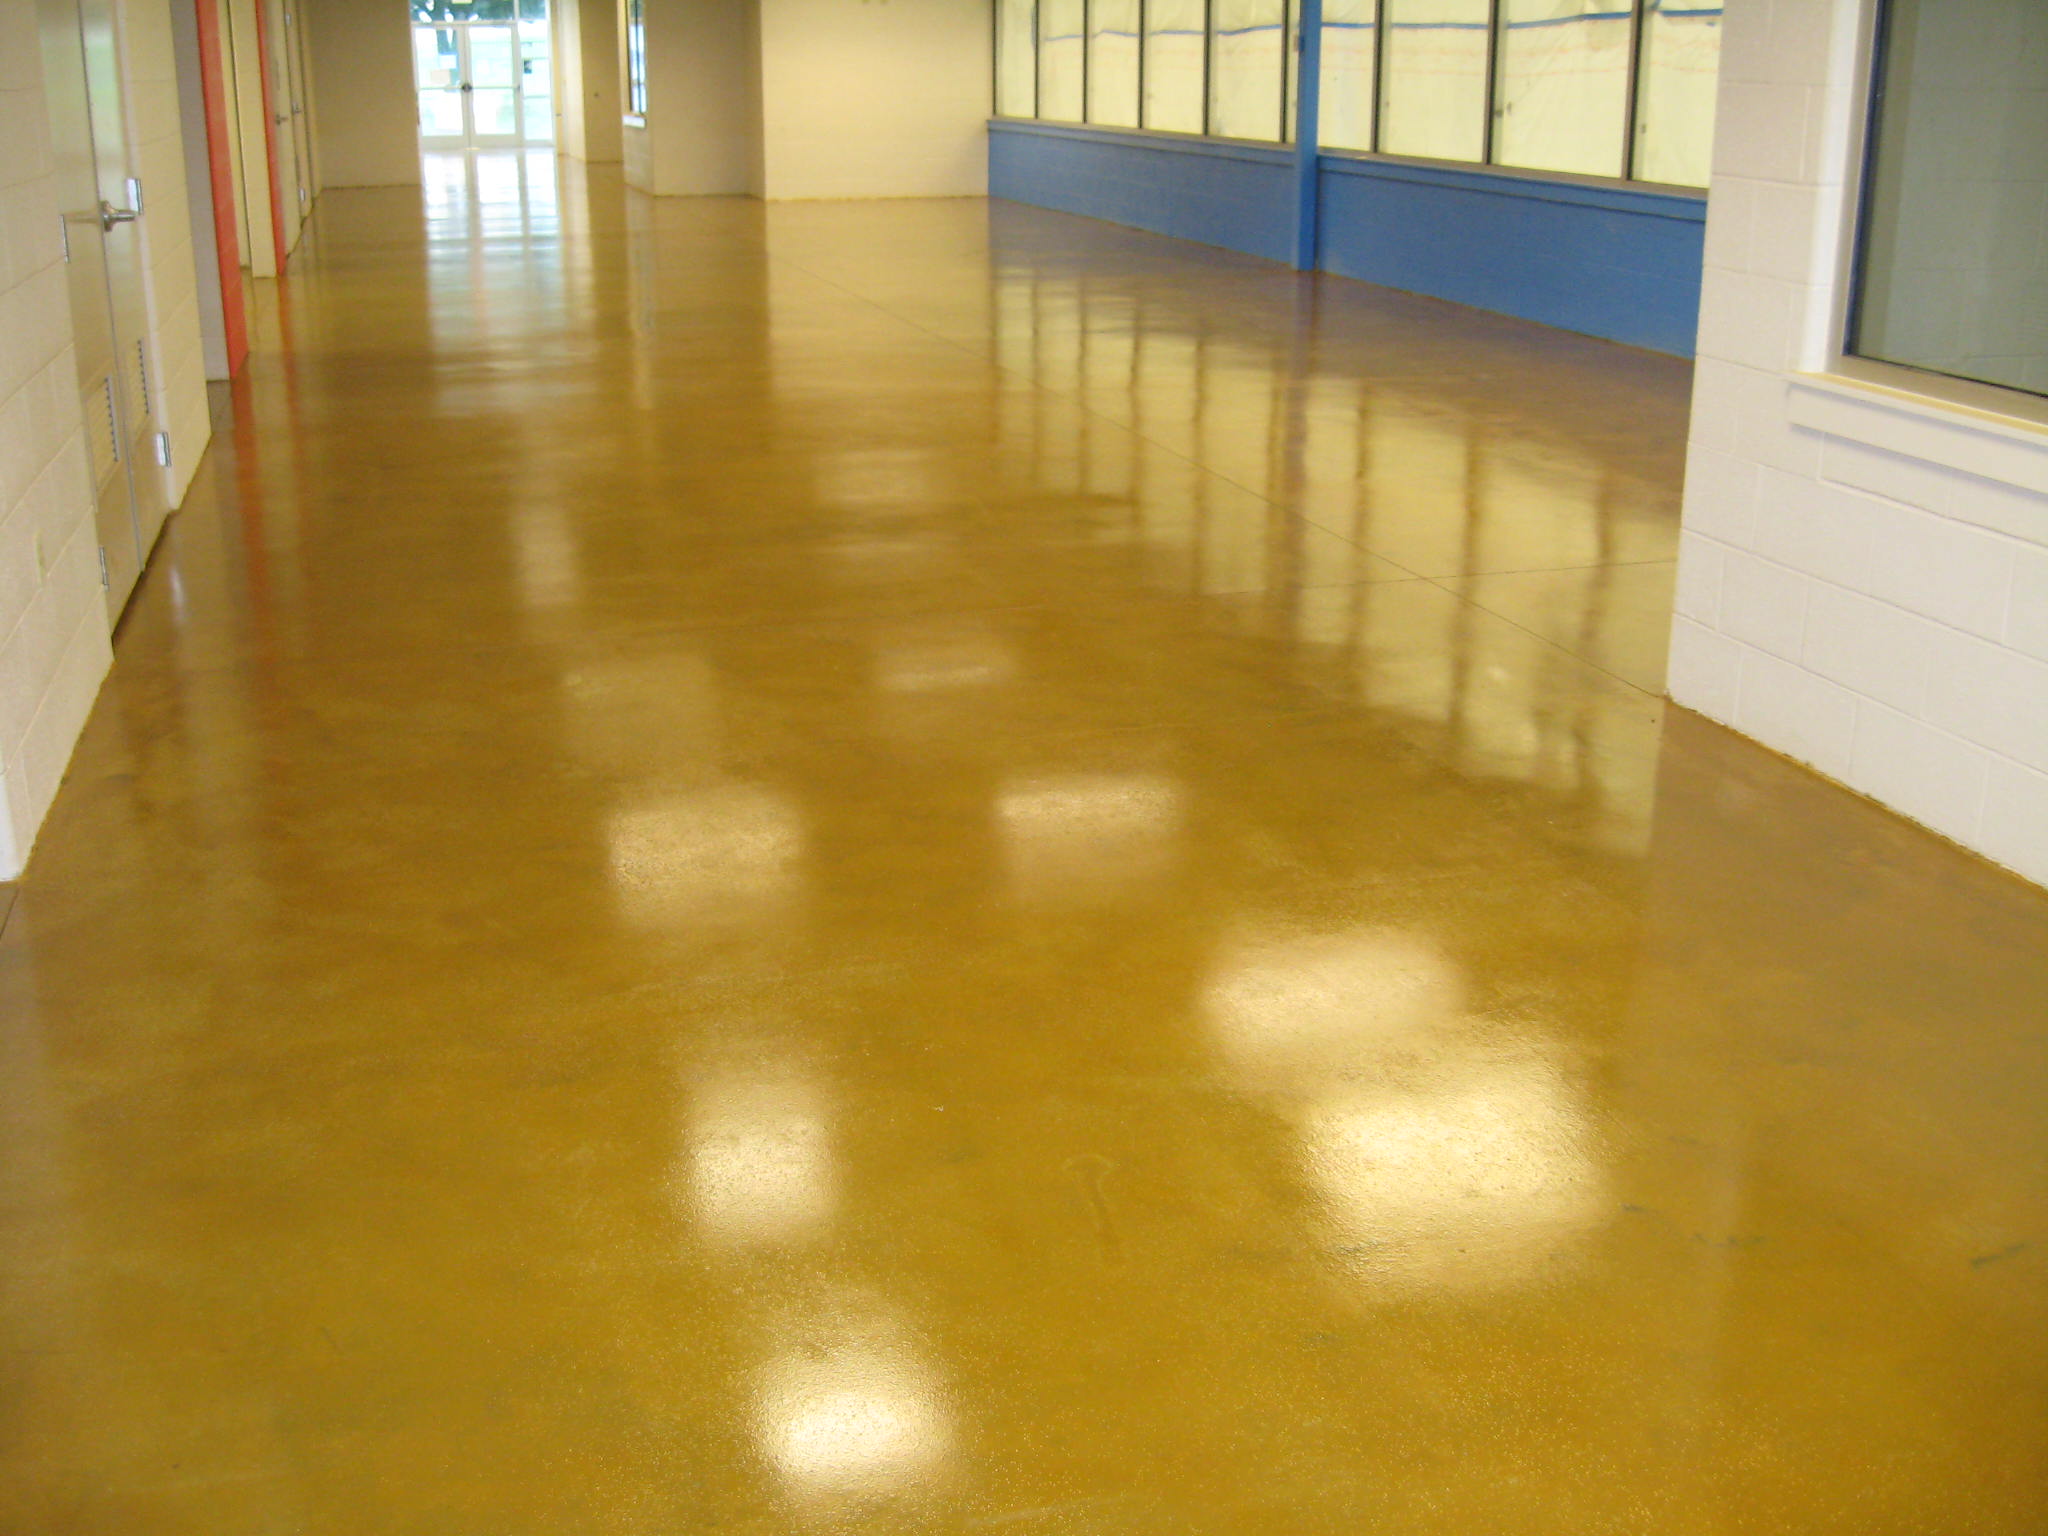 Stained concrete floor.